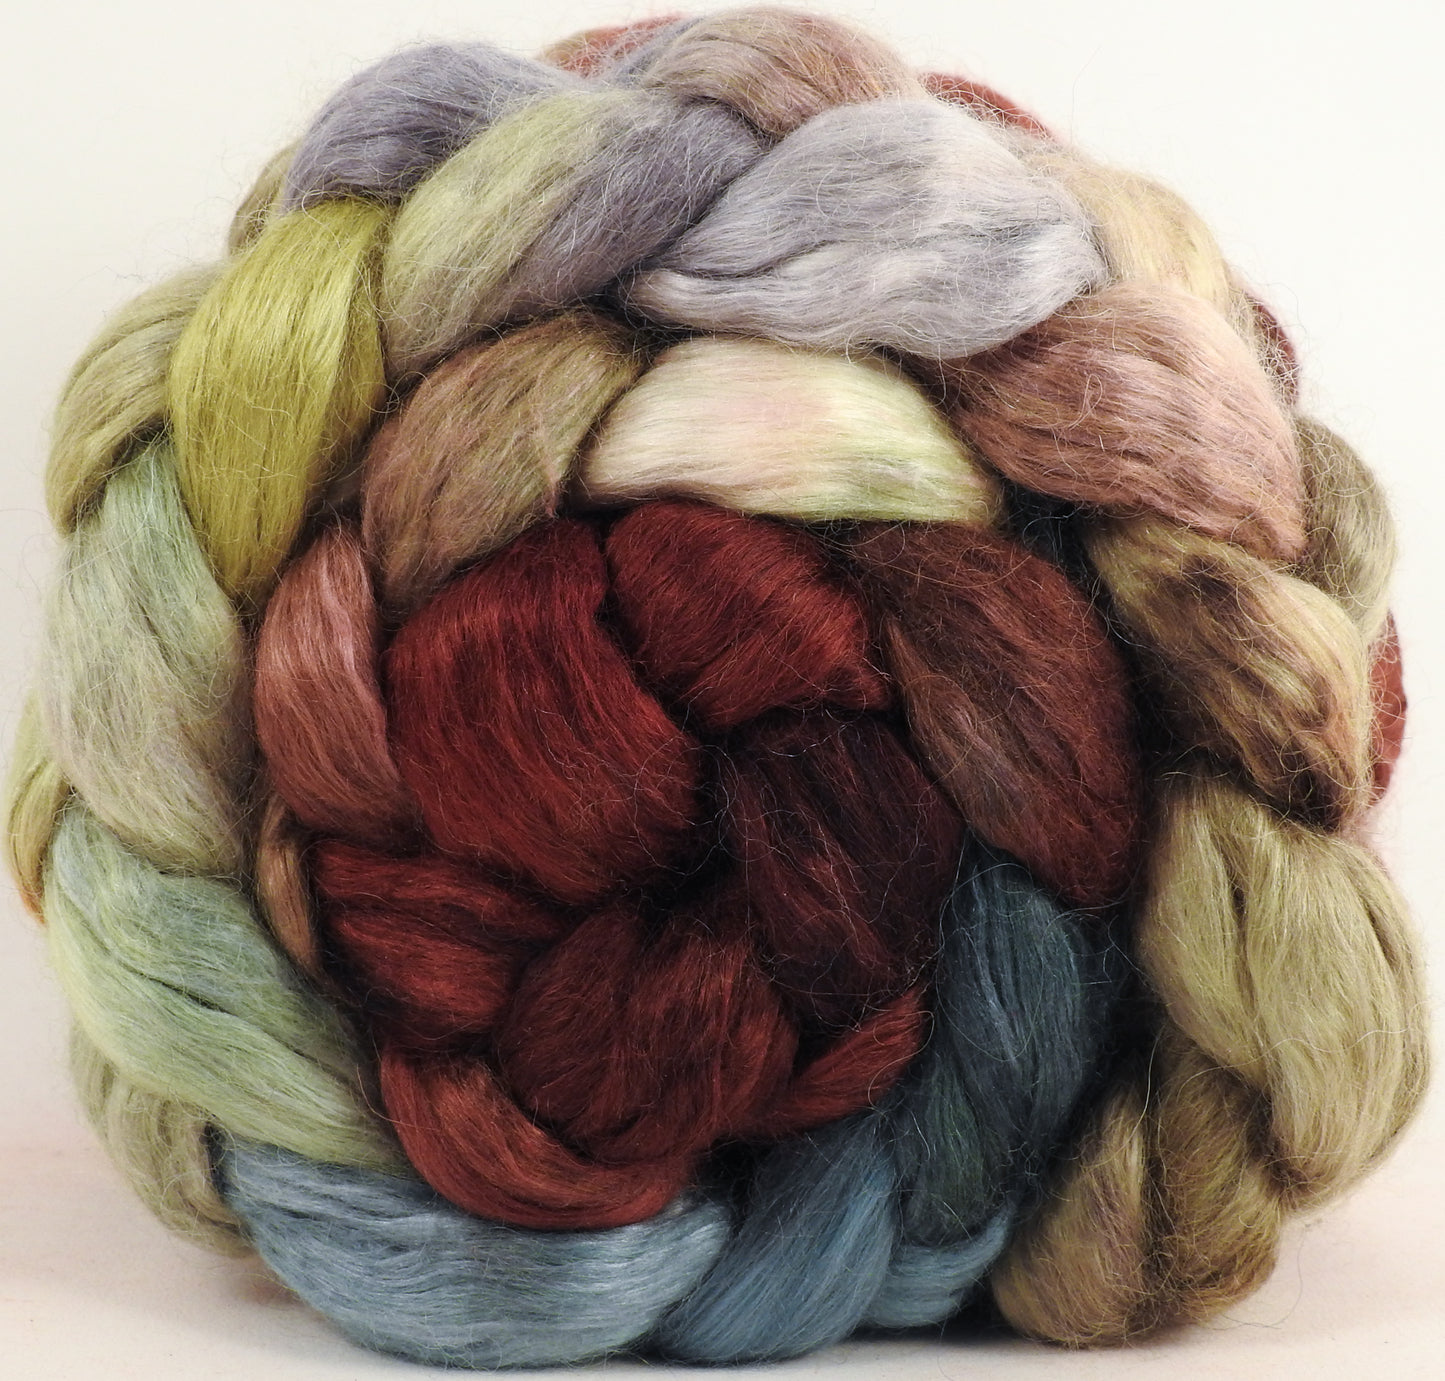 Hand-dyed wensleydale/ mulberry silk roving (65/35) -Winter Beech